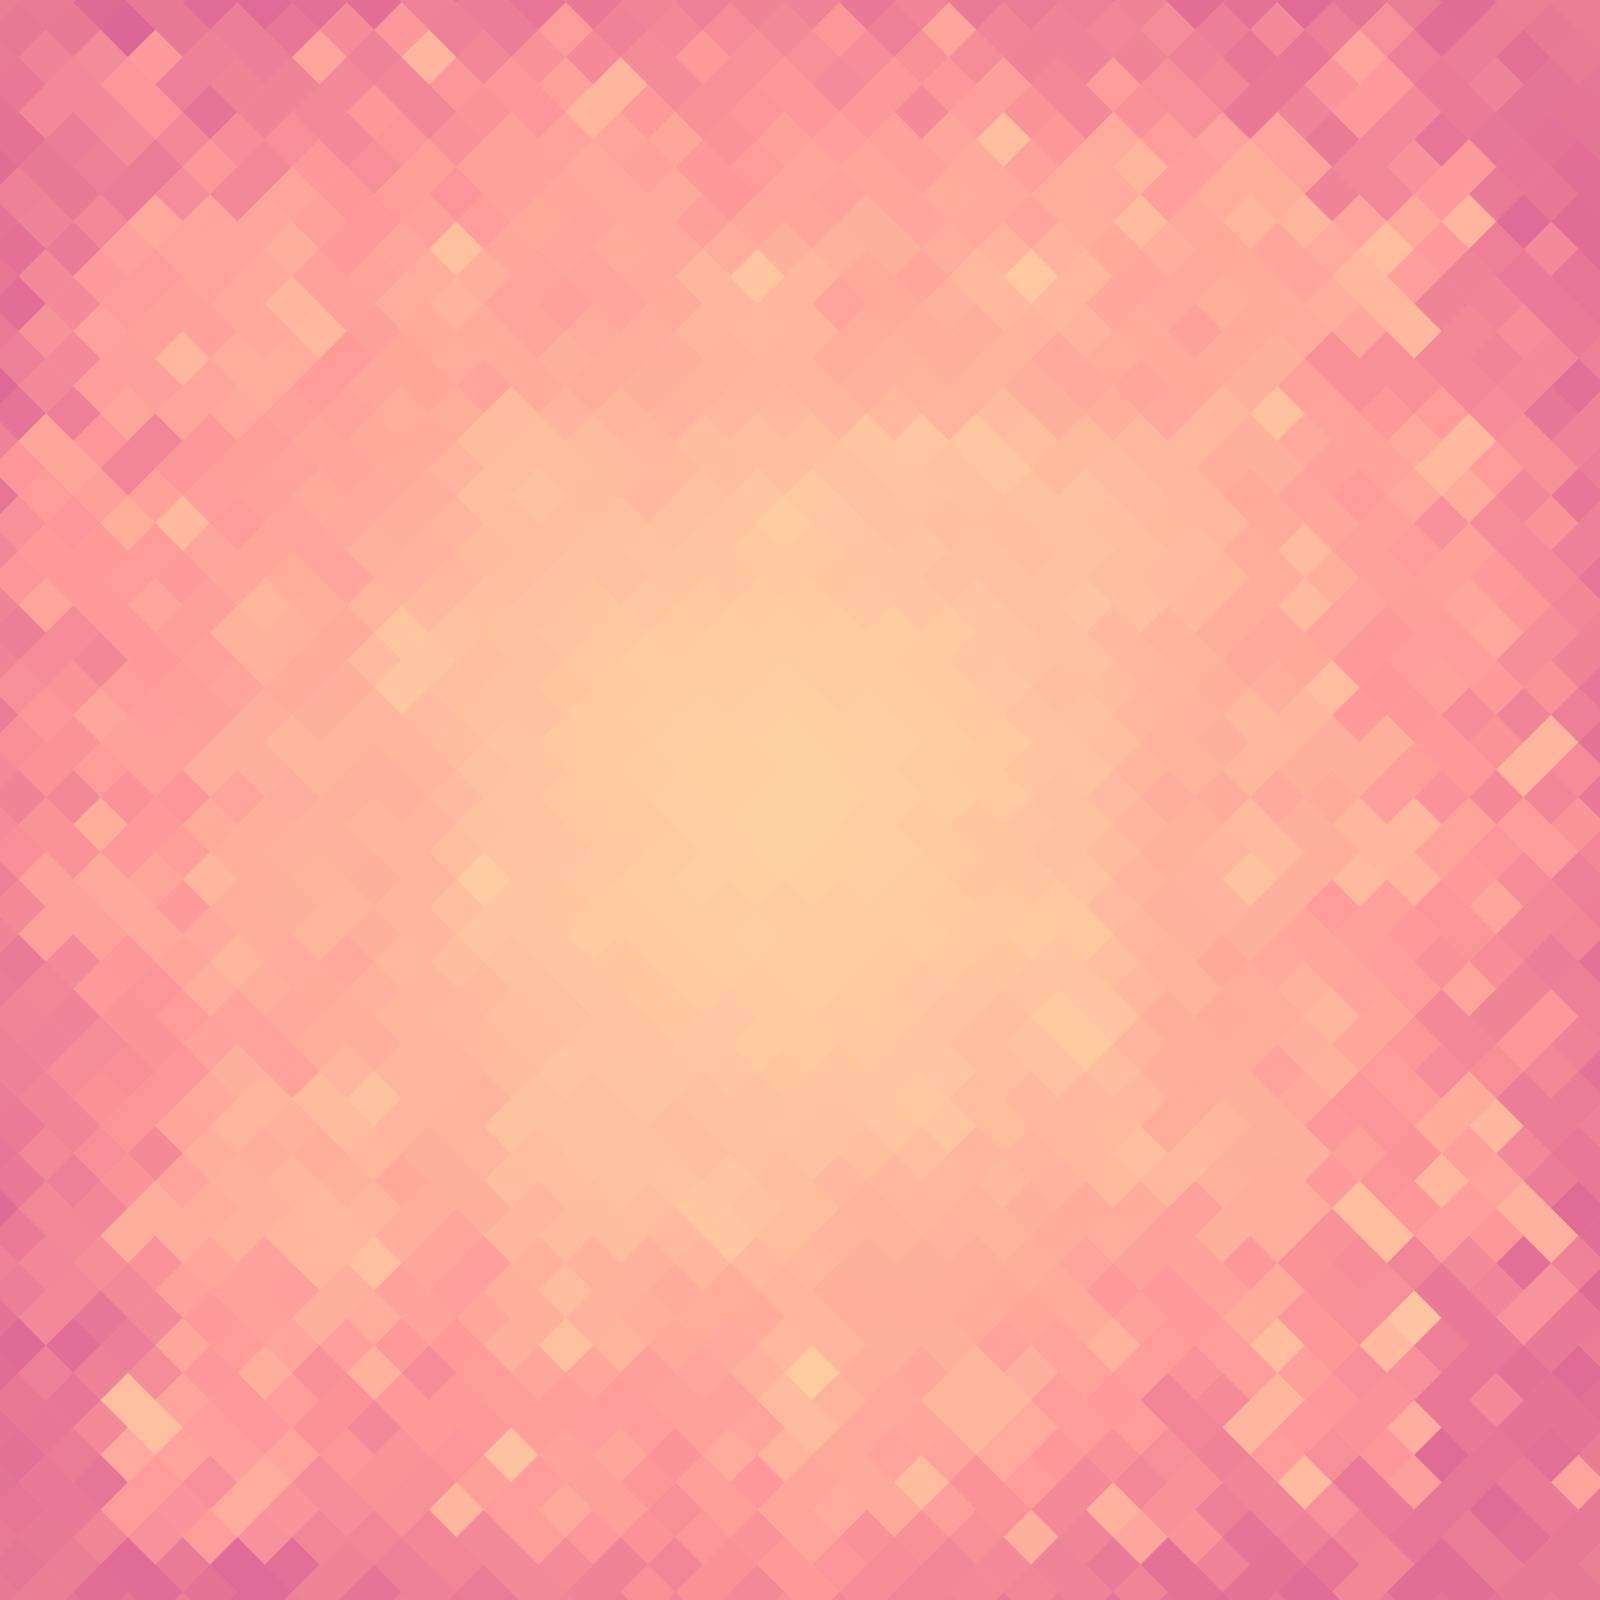 Pink Pixel Background. Pixelated Square Pattern. Pixelated Texture. Abstract Mosaic Modern Design.